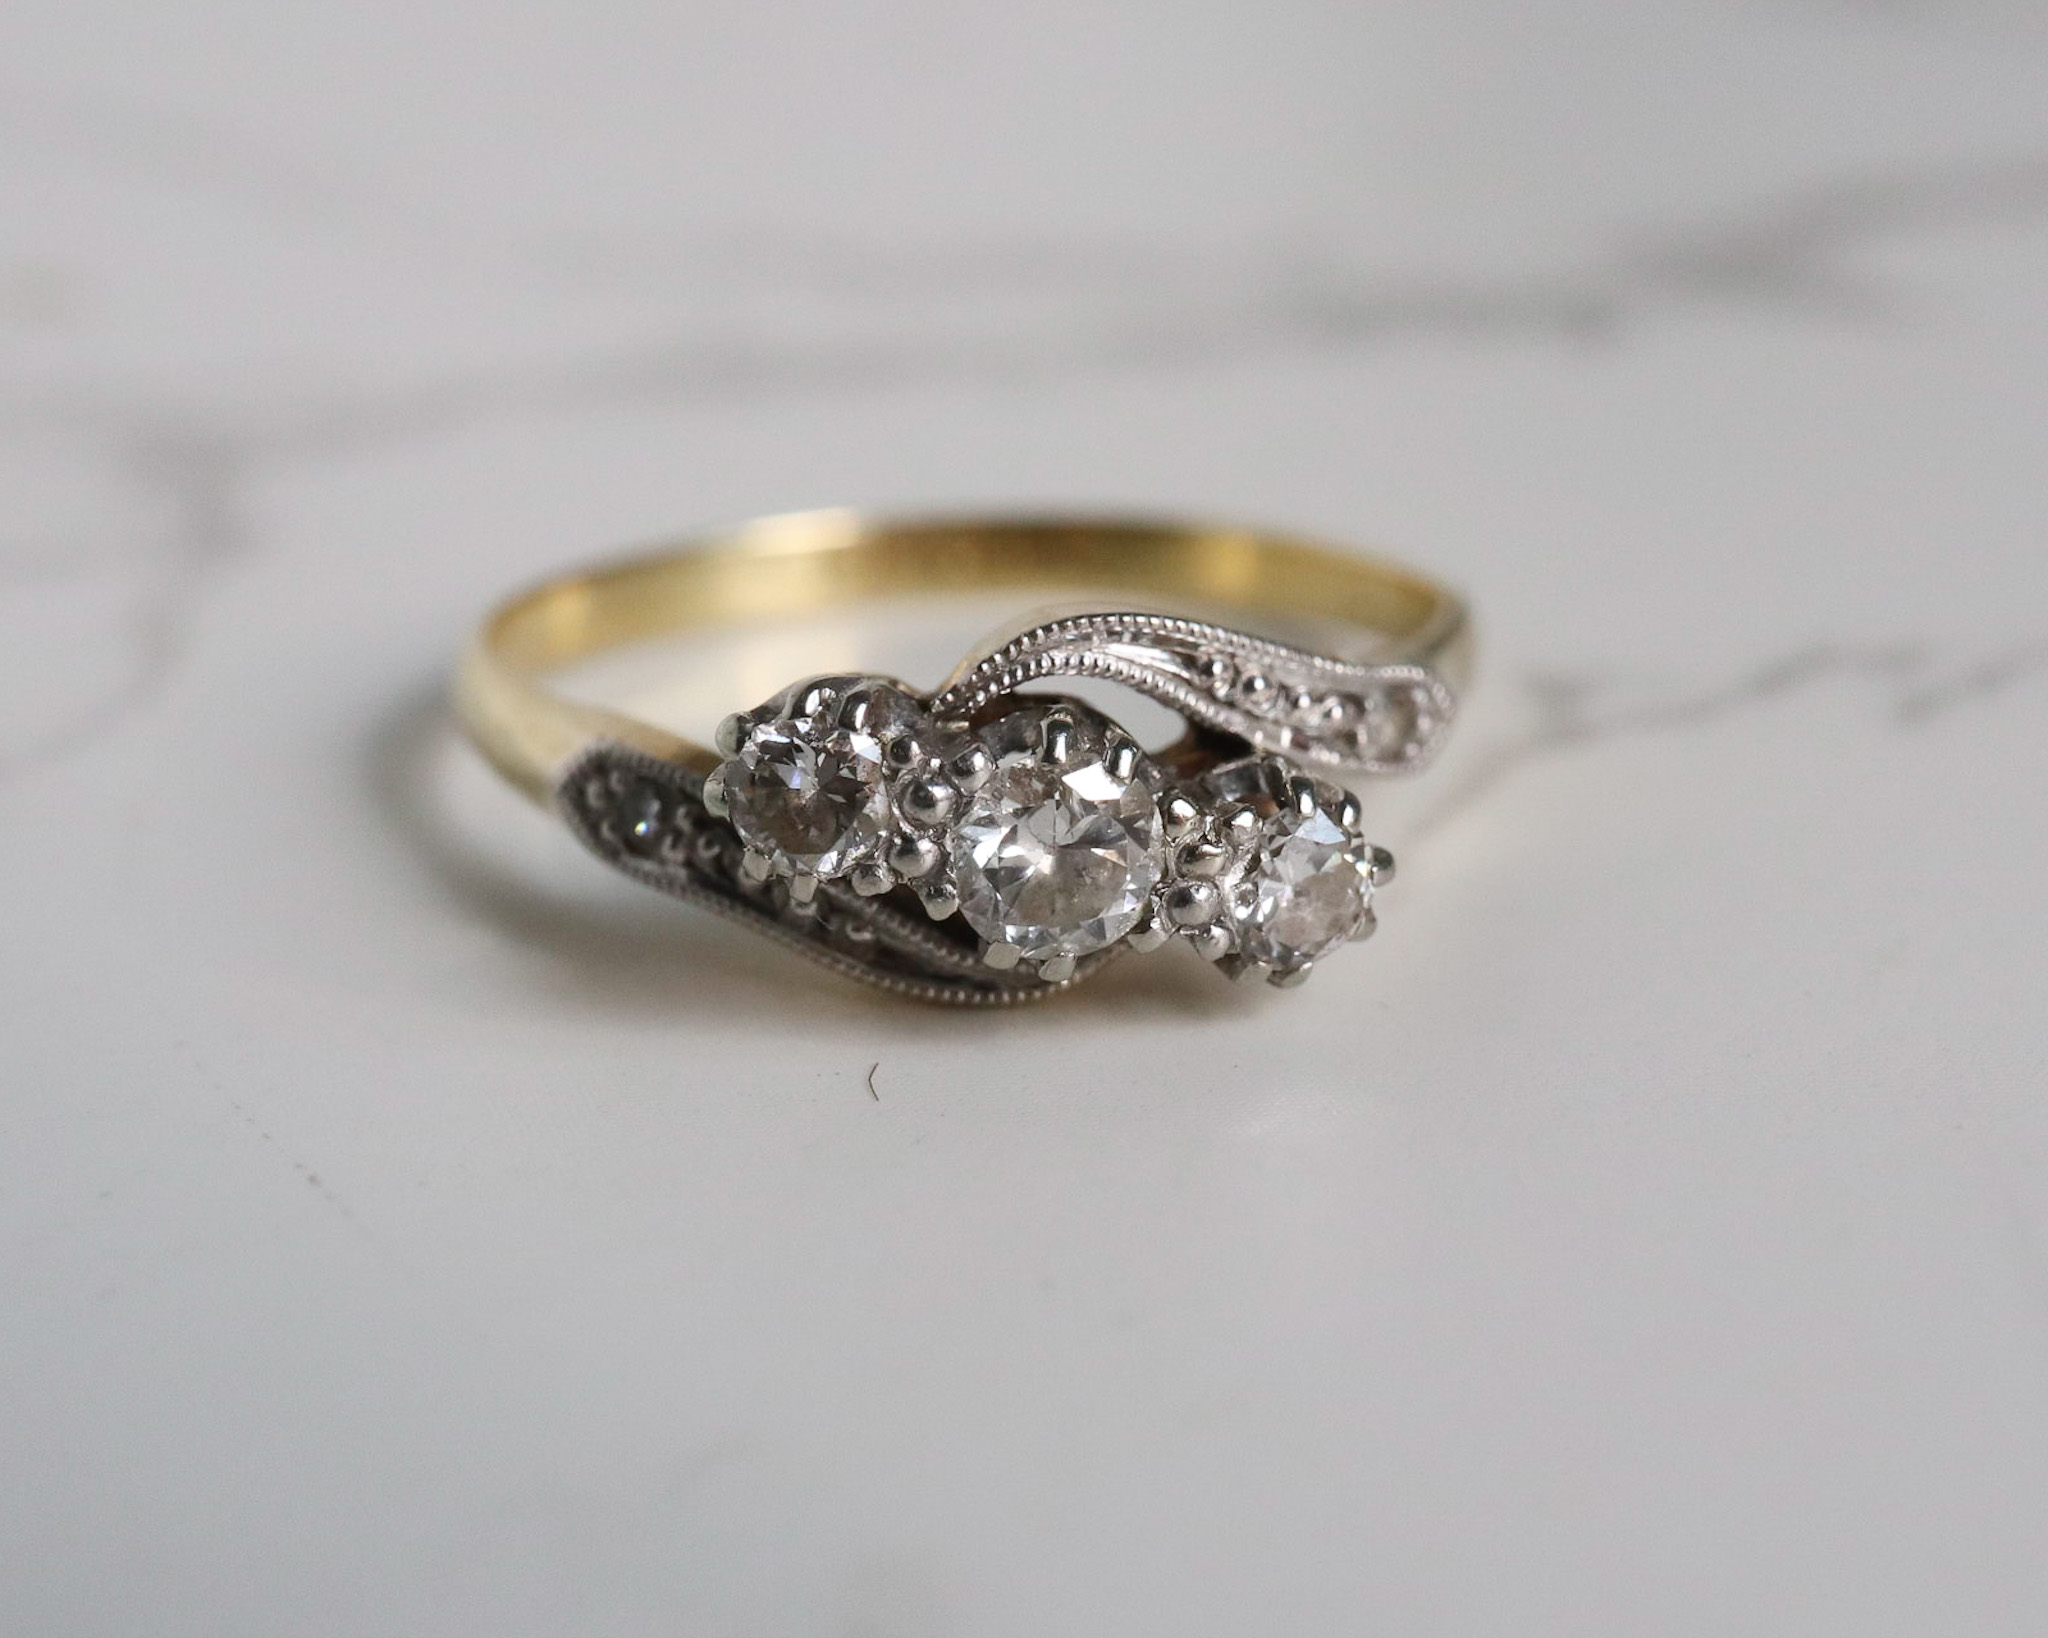 Antique Art Deco diamond three stone twist ring in 18ct yellow gold and platinum for sale in Leeds, Yorkshire